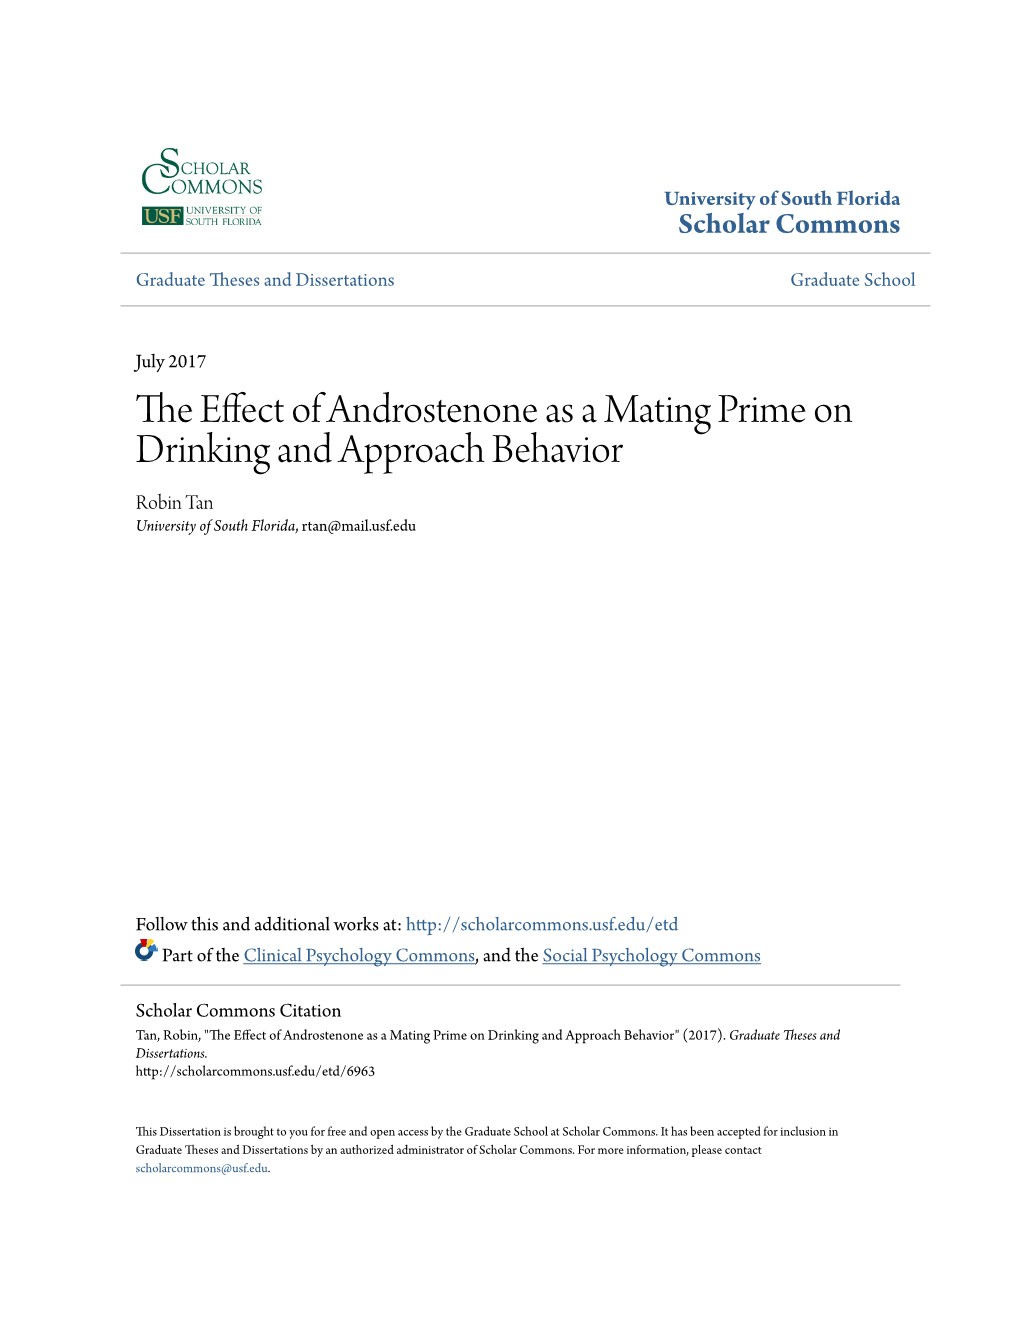 The Effect of Androstenone As a Mating Prime on Drinking and Approach Behavior" (2017)